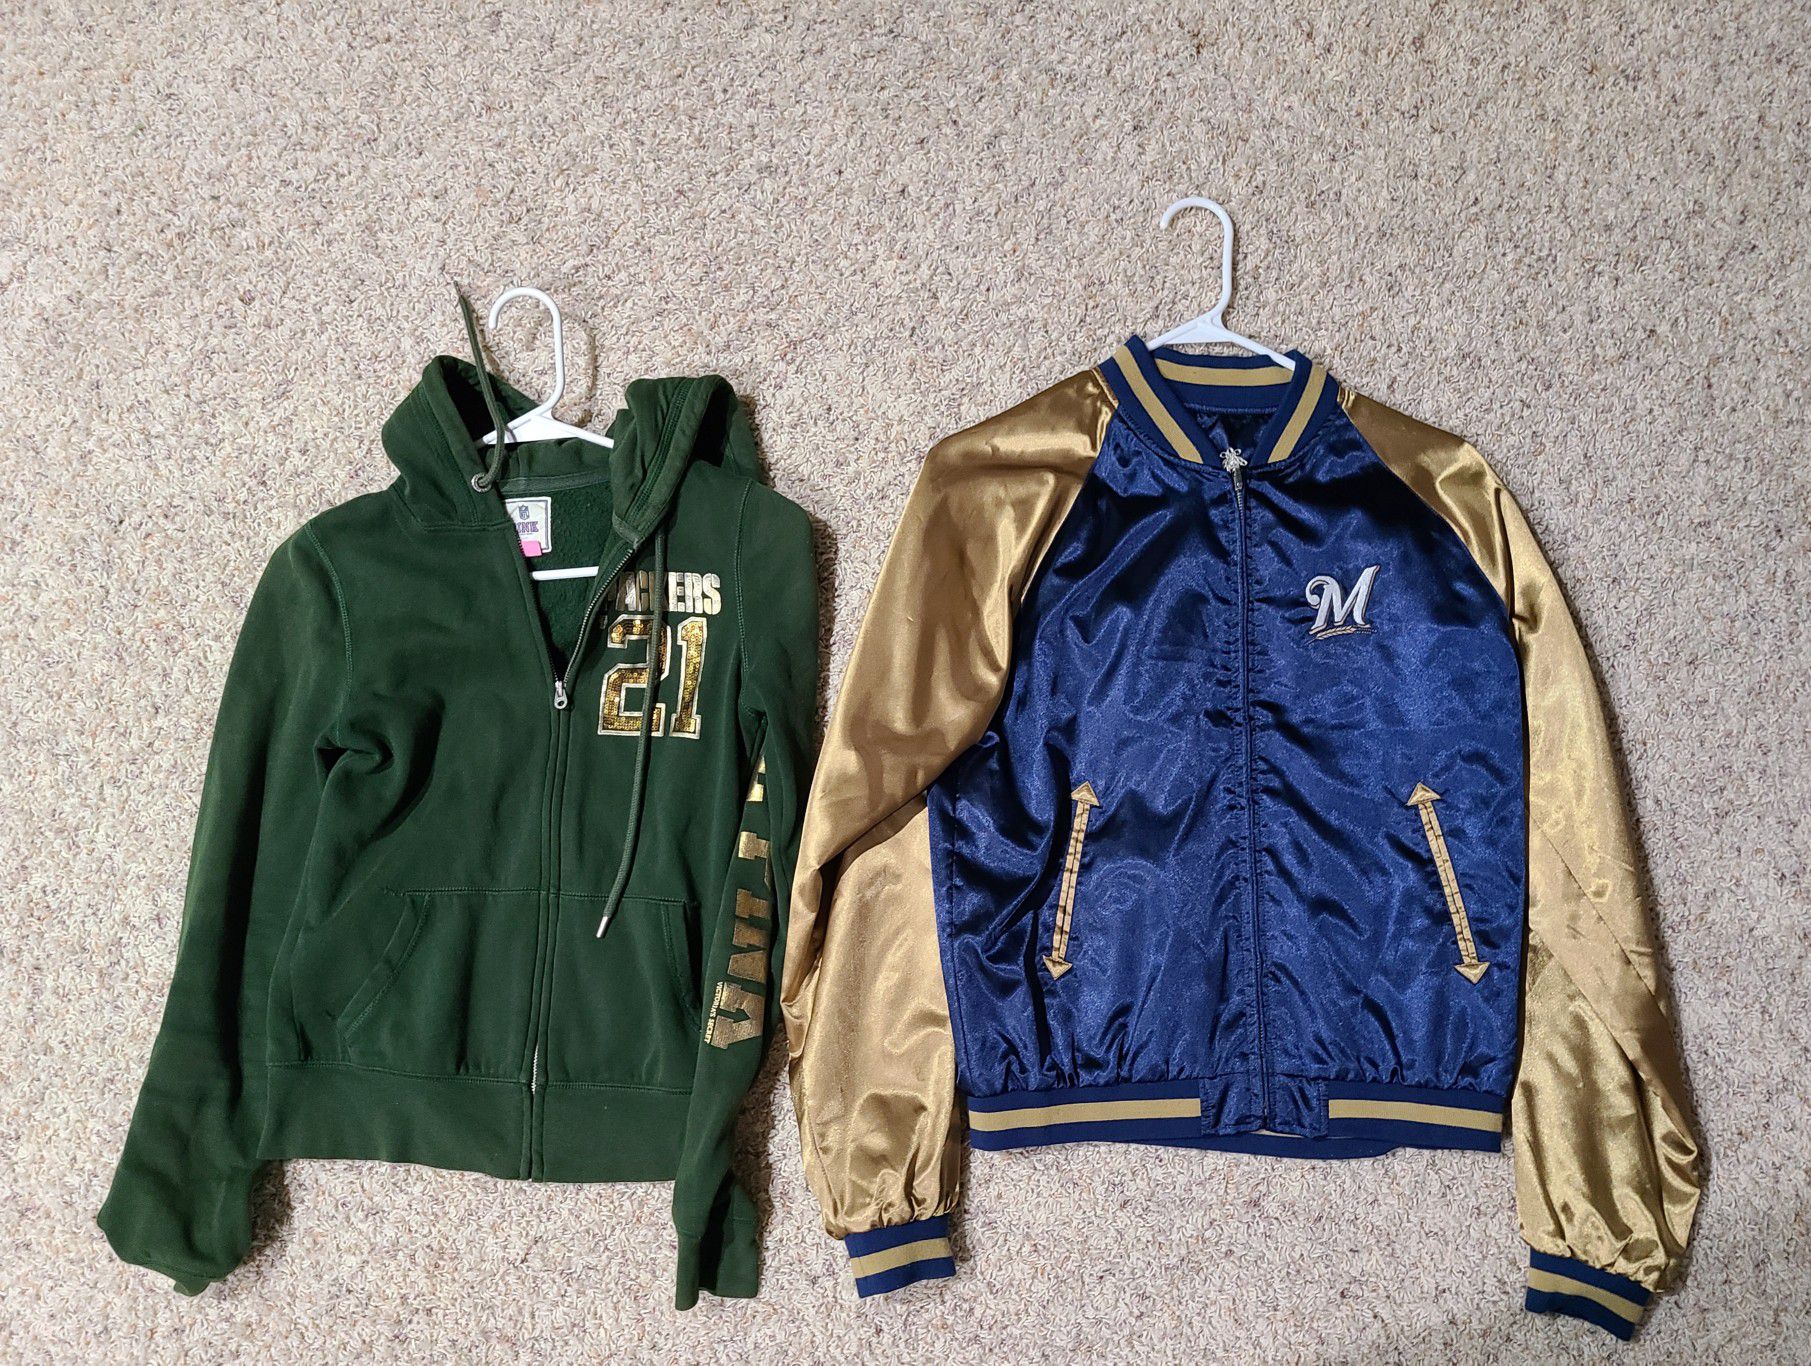 Womens size small Packers Hoodie and Brewers Jacket